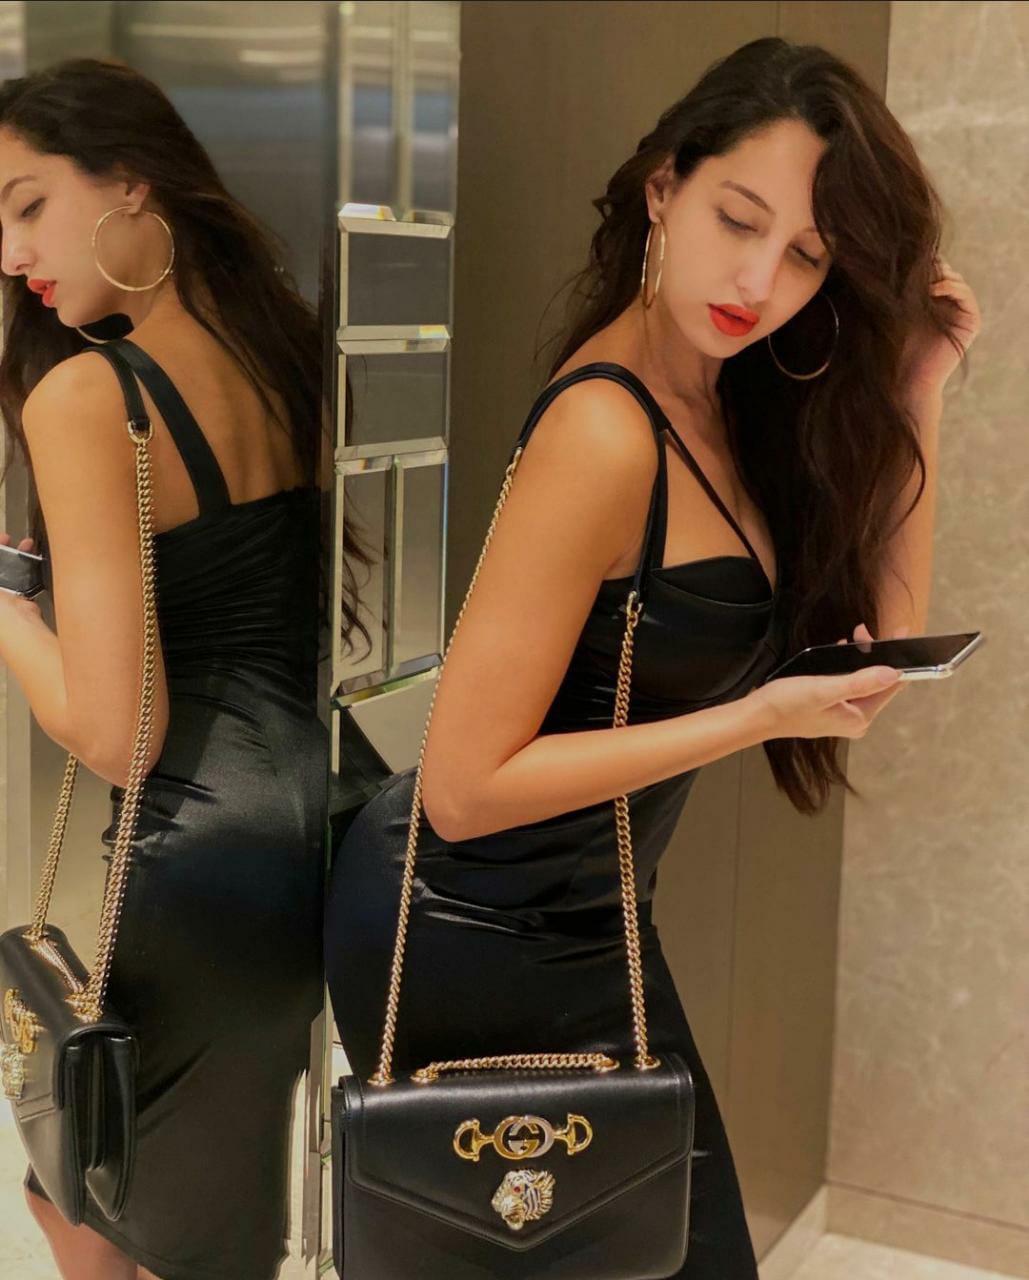 Nora Fatehi pairs her all-black casuals with Fendi bag worth Rs